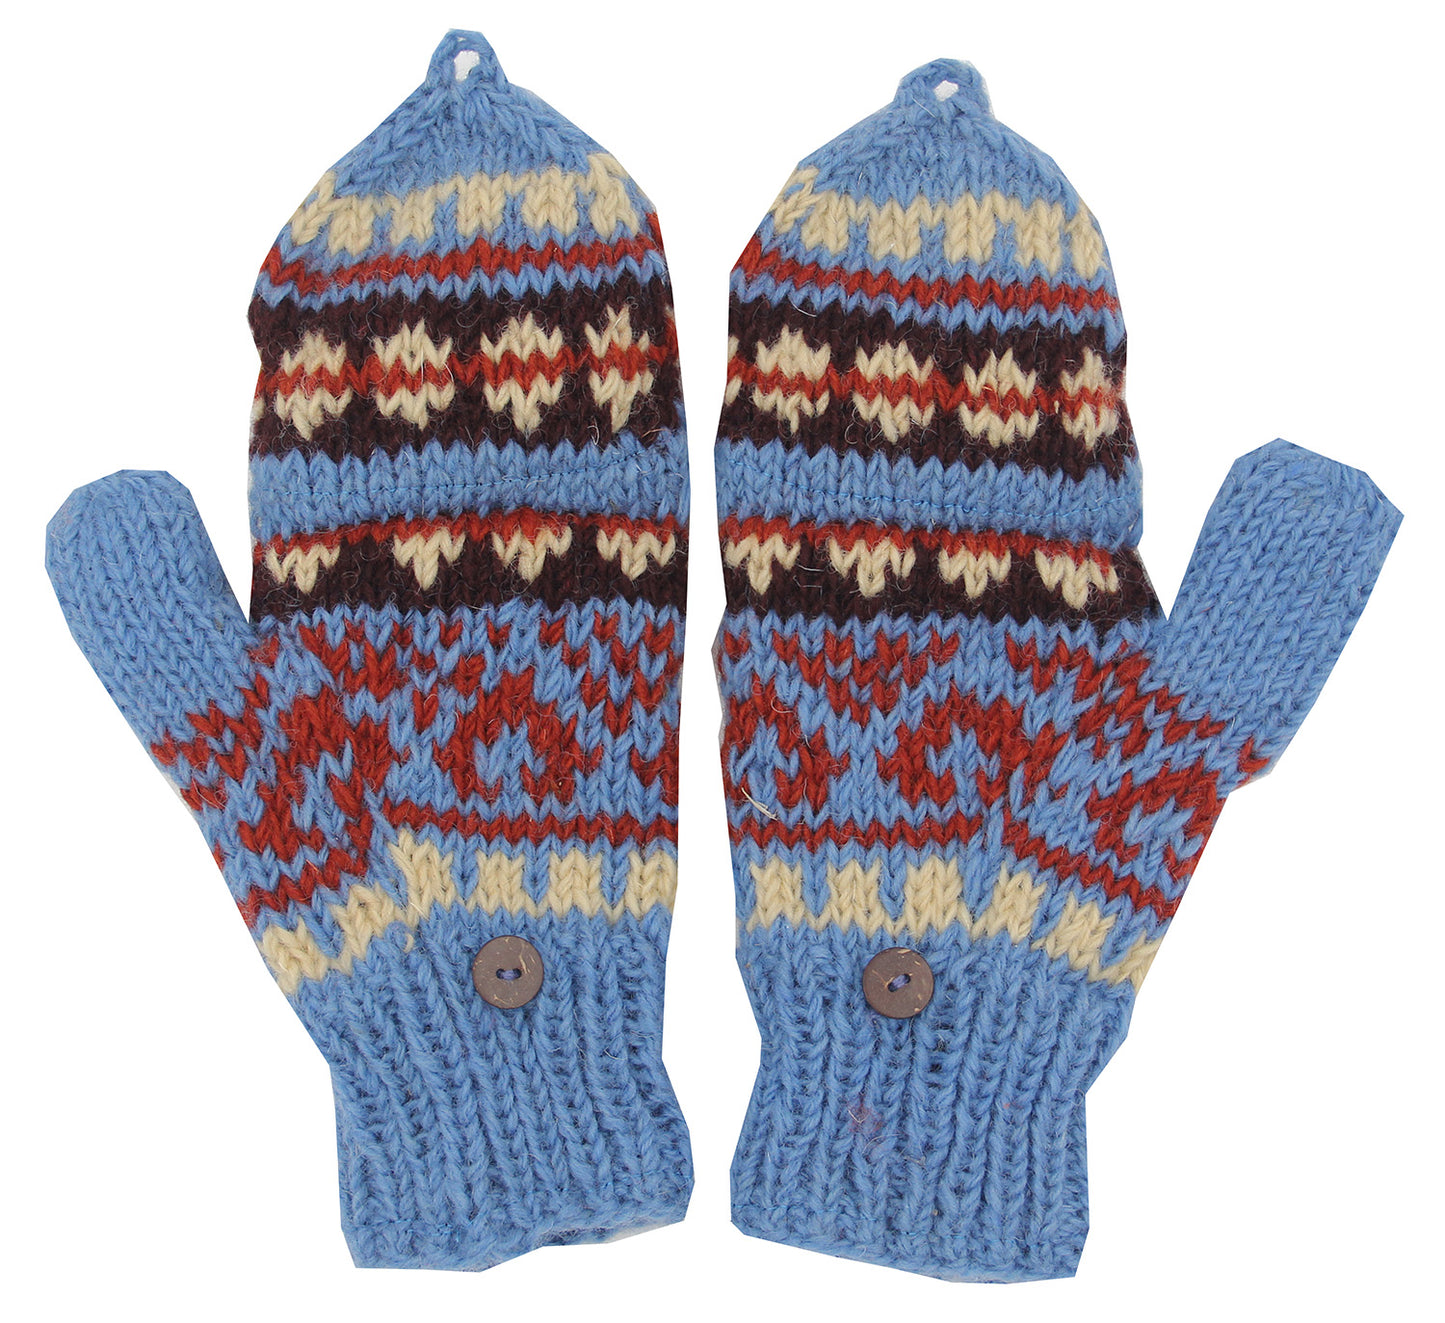 Hand Knit 100% Wool Convertible Finger less Mittens Glove Nepal - DharmaObjects